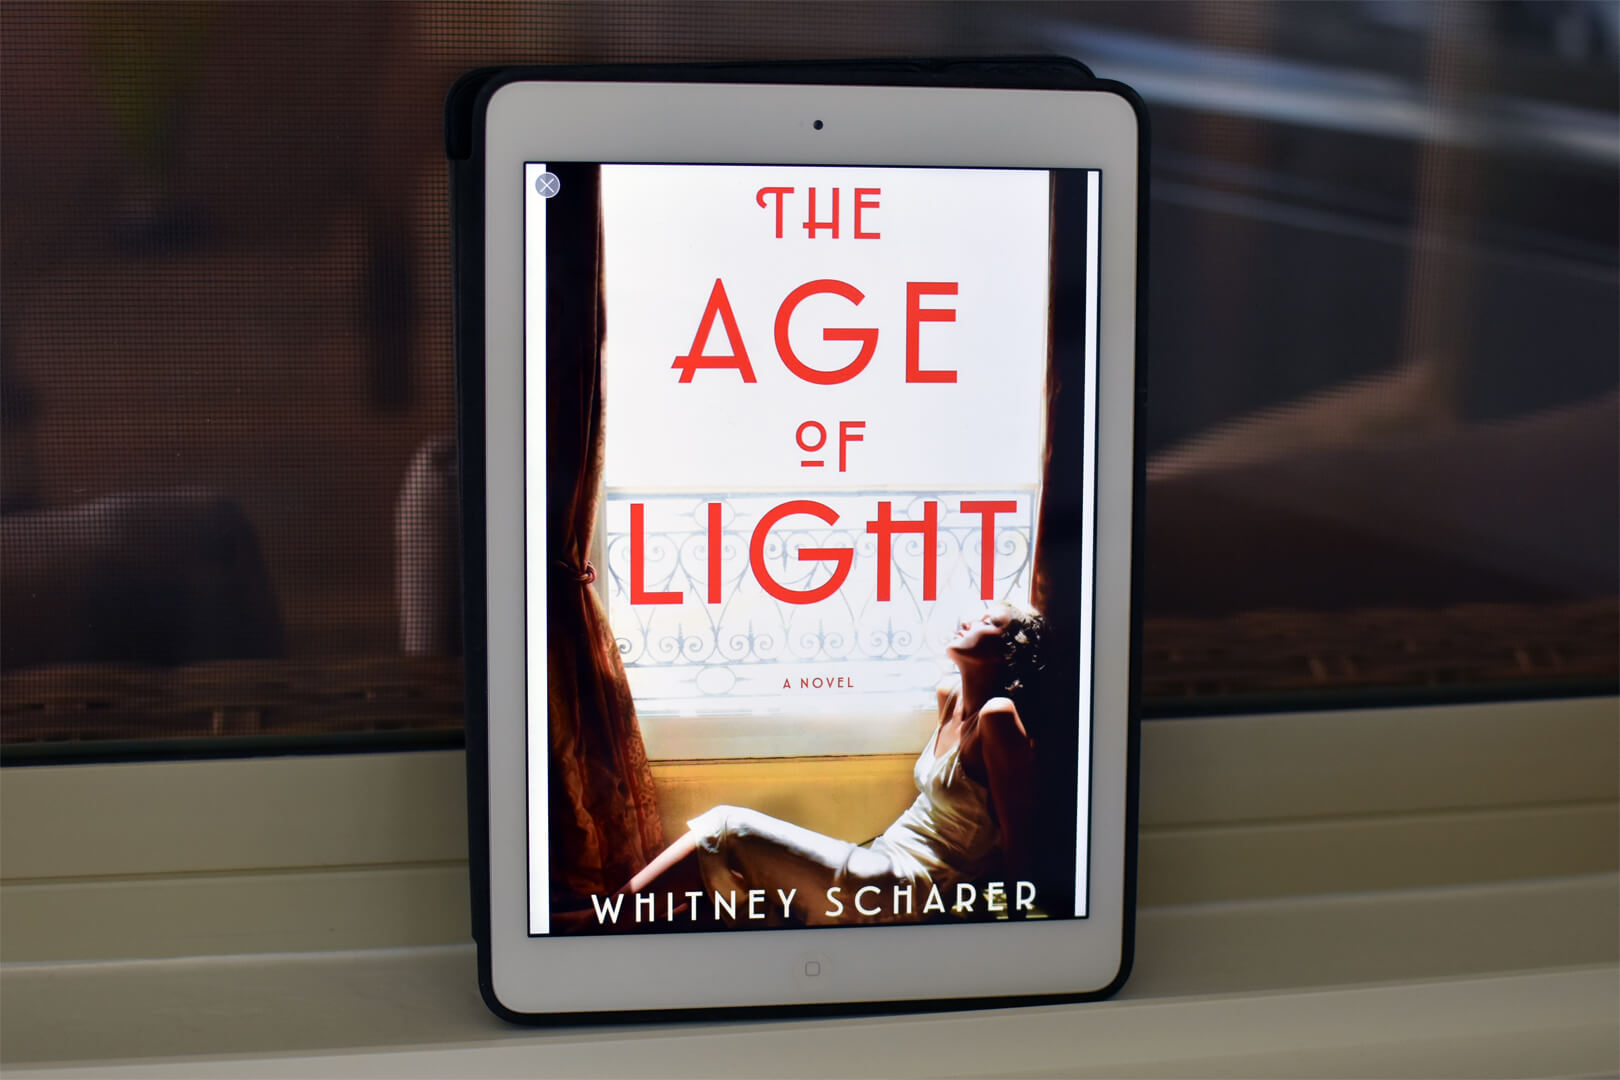 Review: The Age of Light by Whitney Scharer